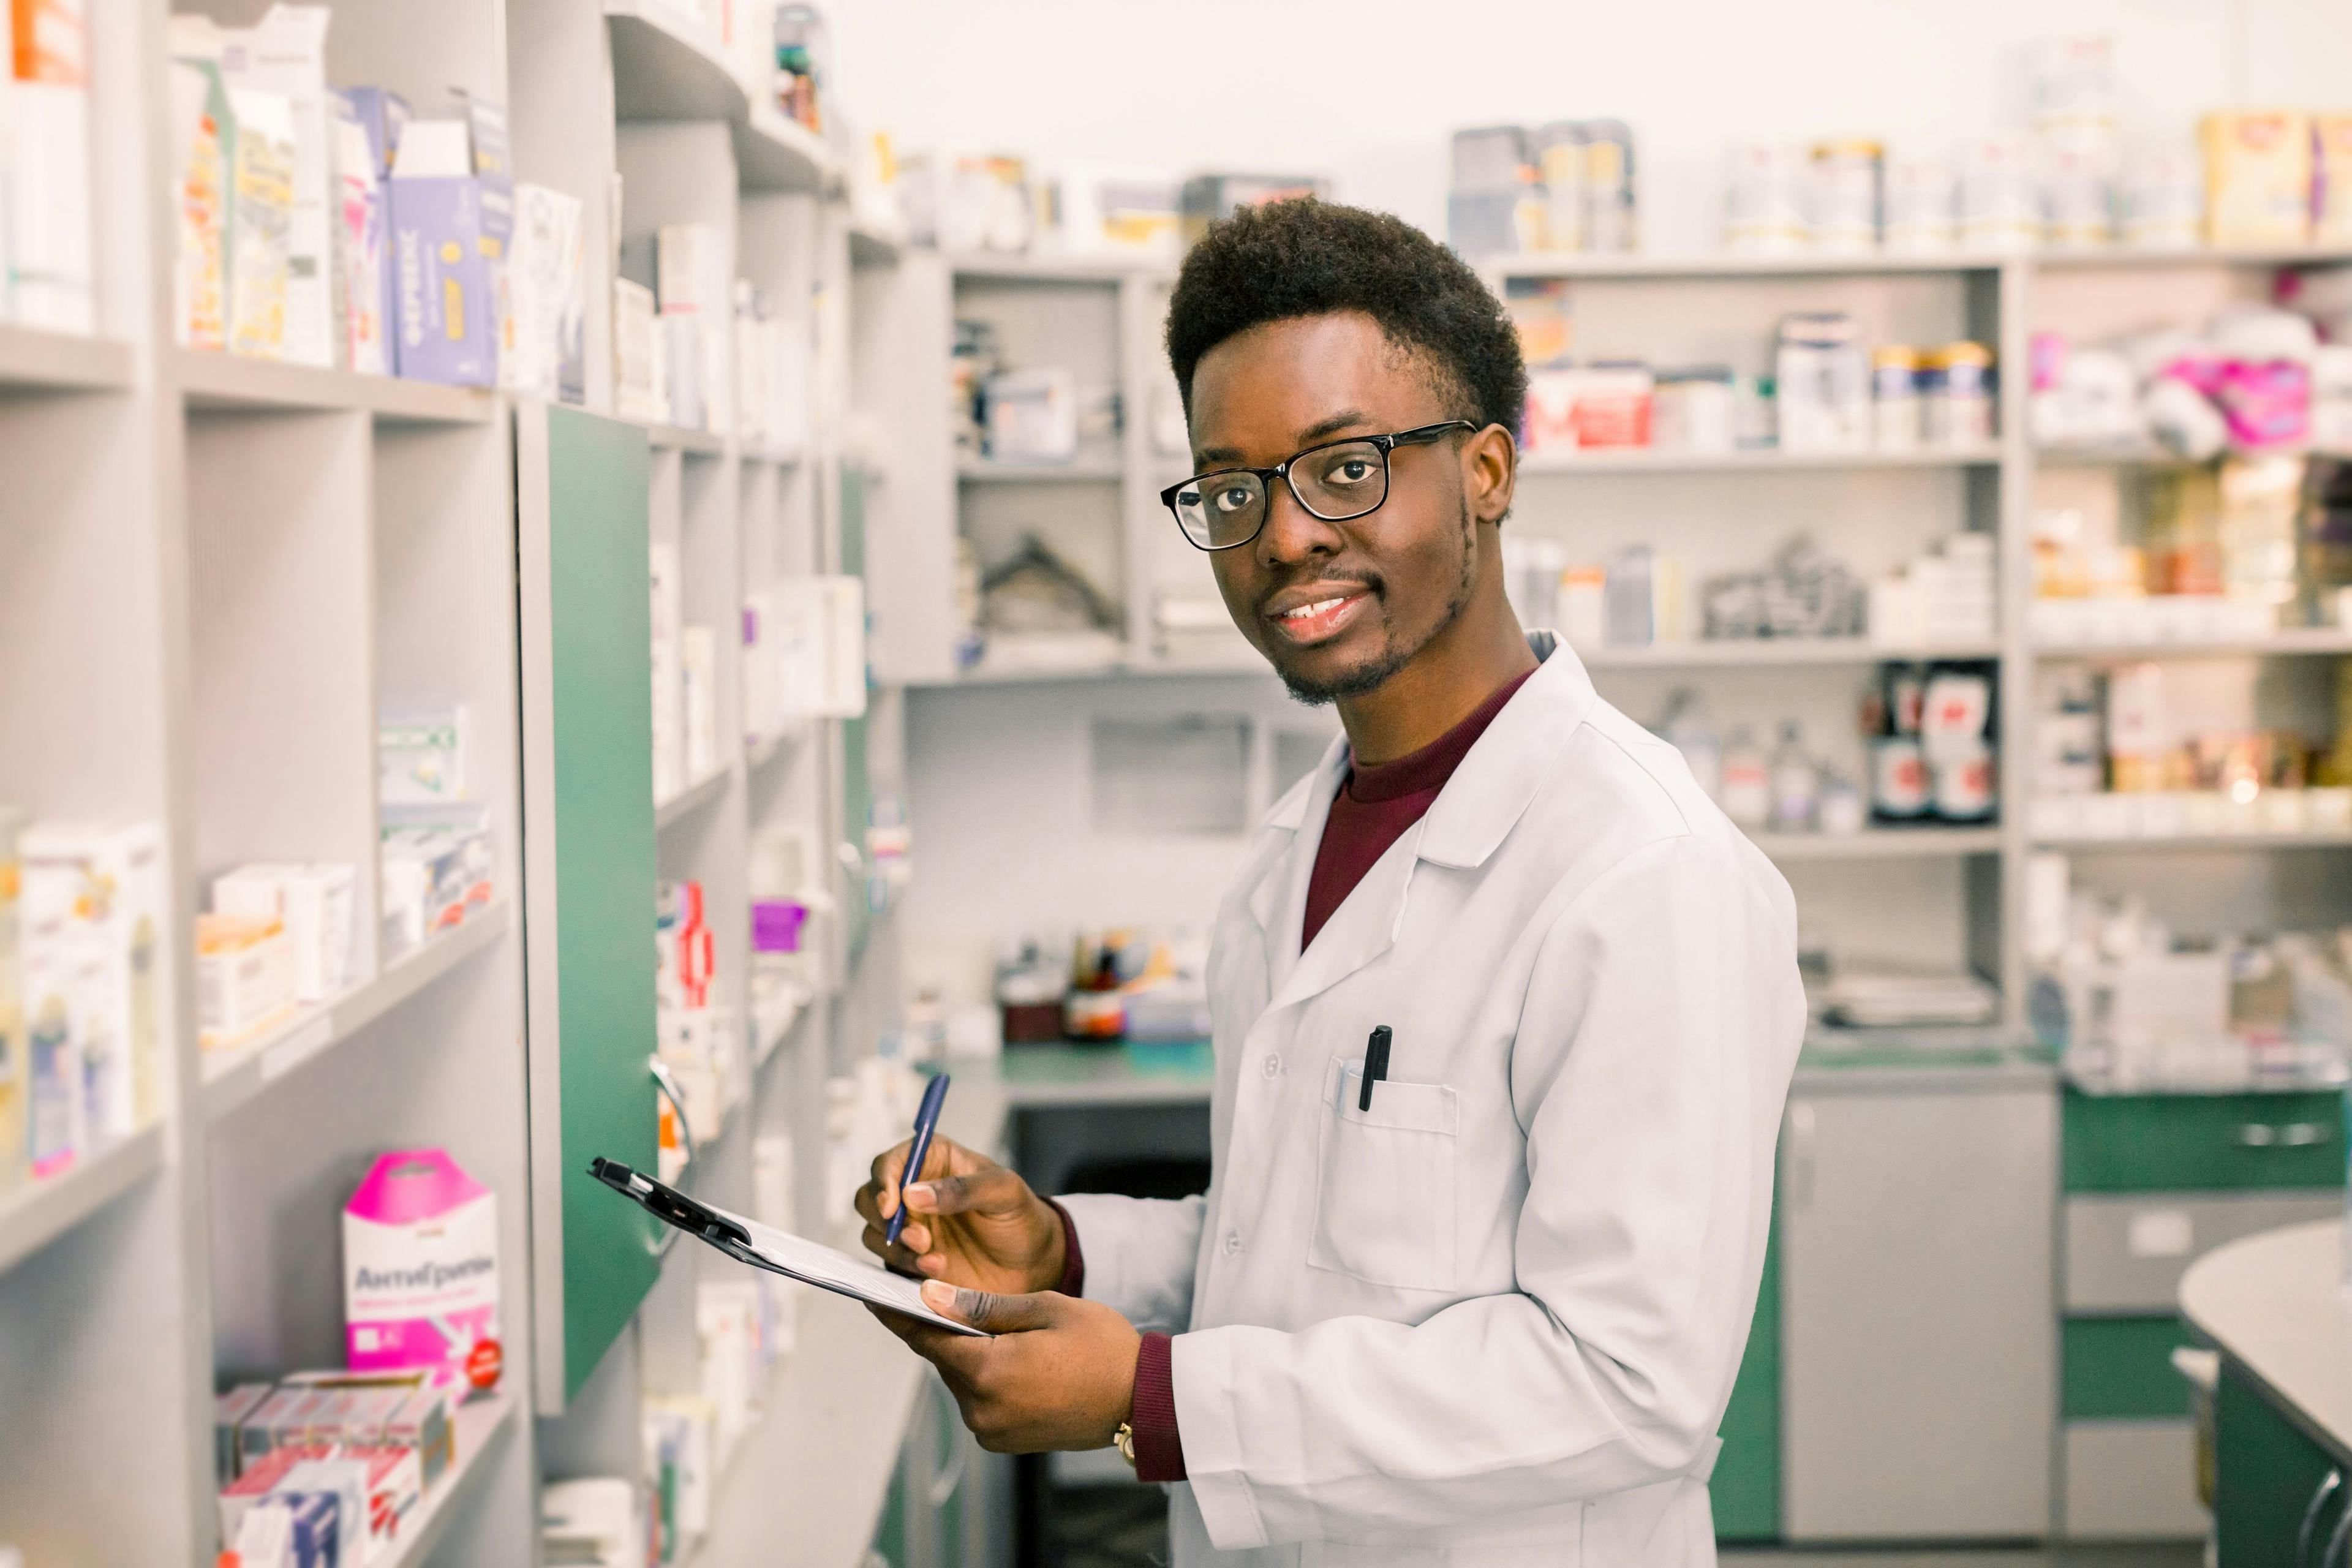 Smiling pharmacist technician looking at the camera and holding medications in the pharmacy